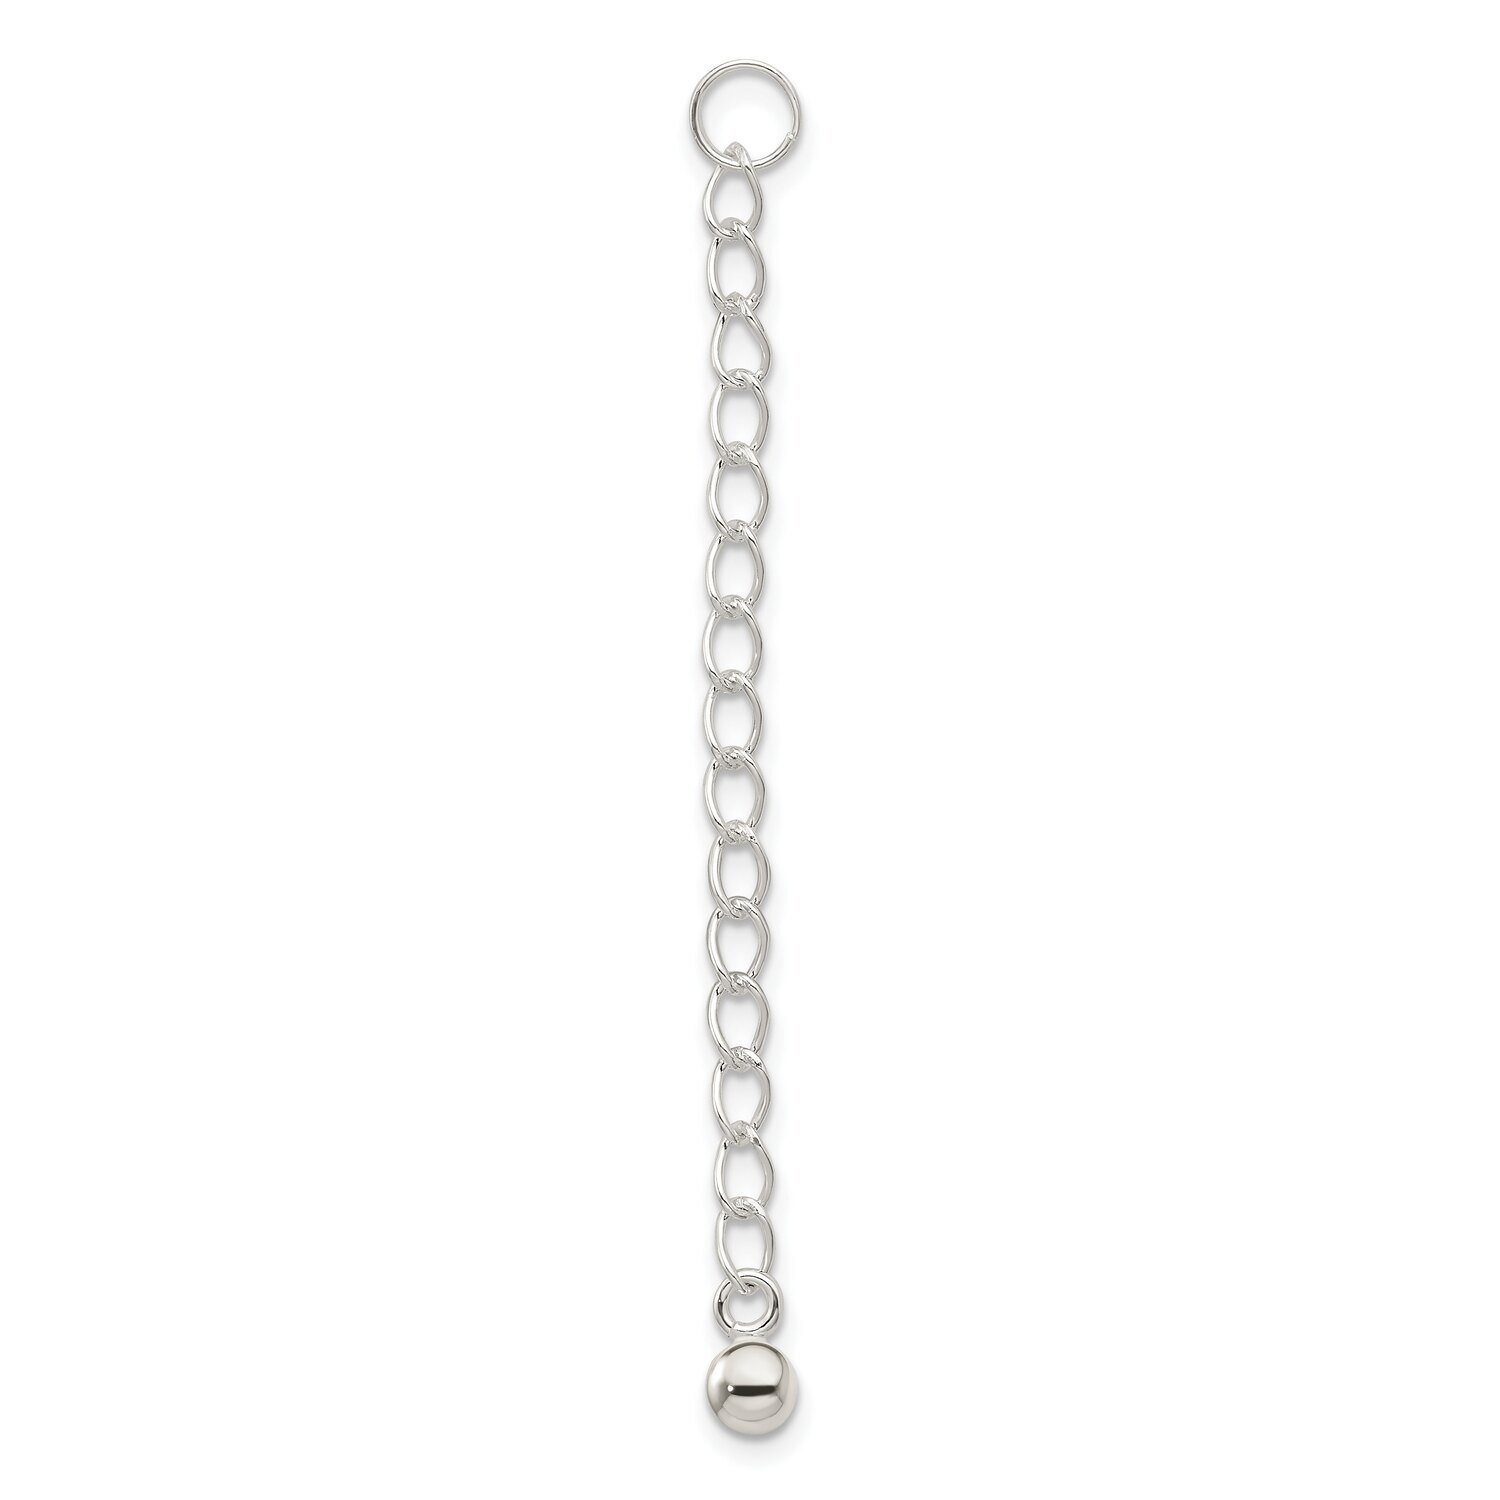 Round Bead 2 inch Chain Extender Sterling Silver SS3731